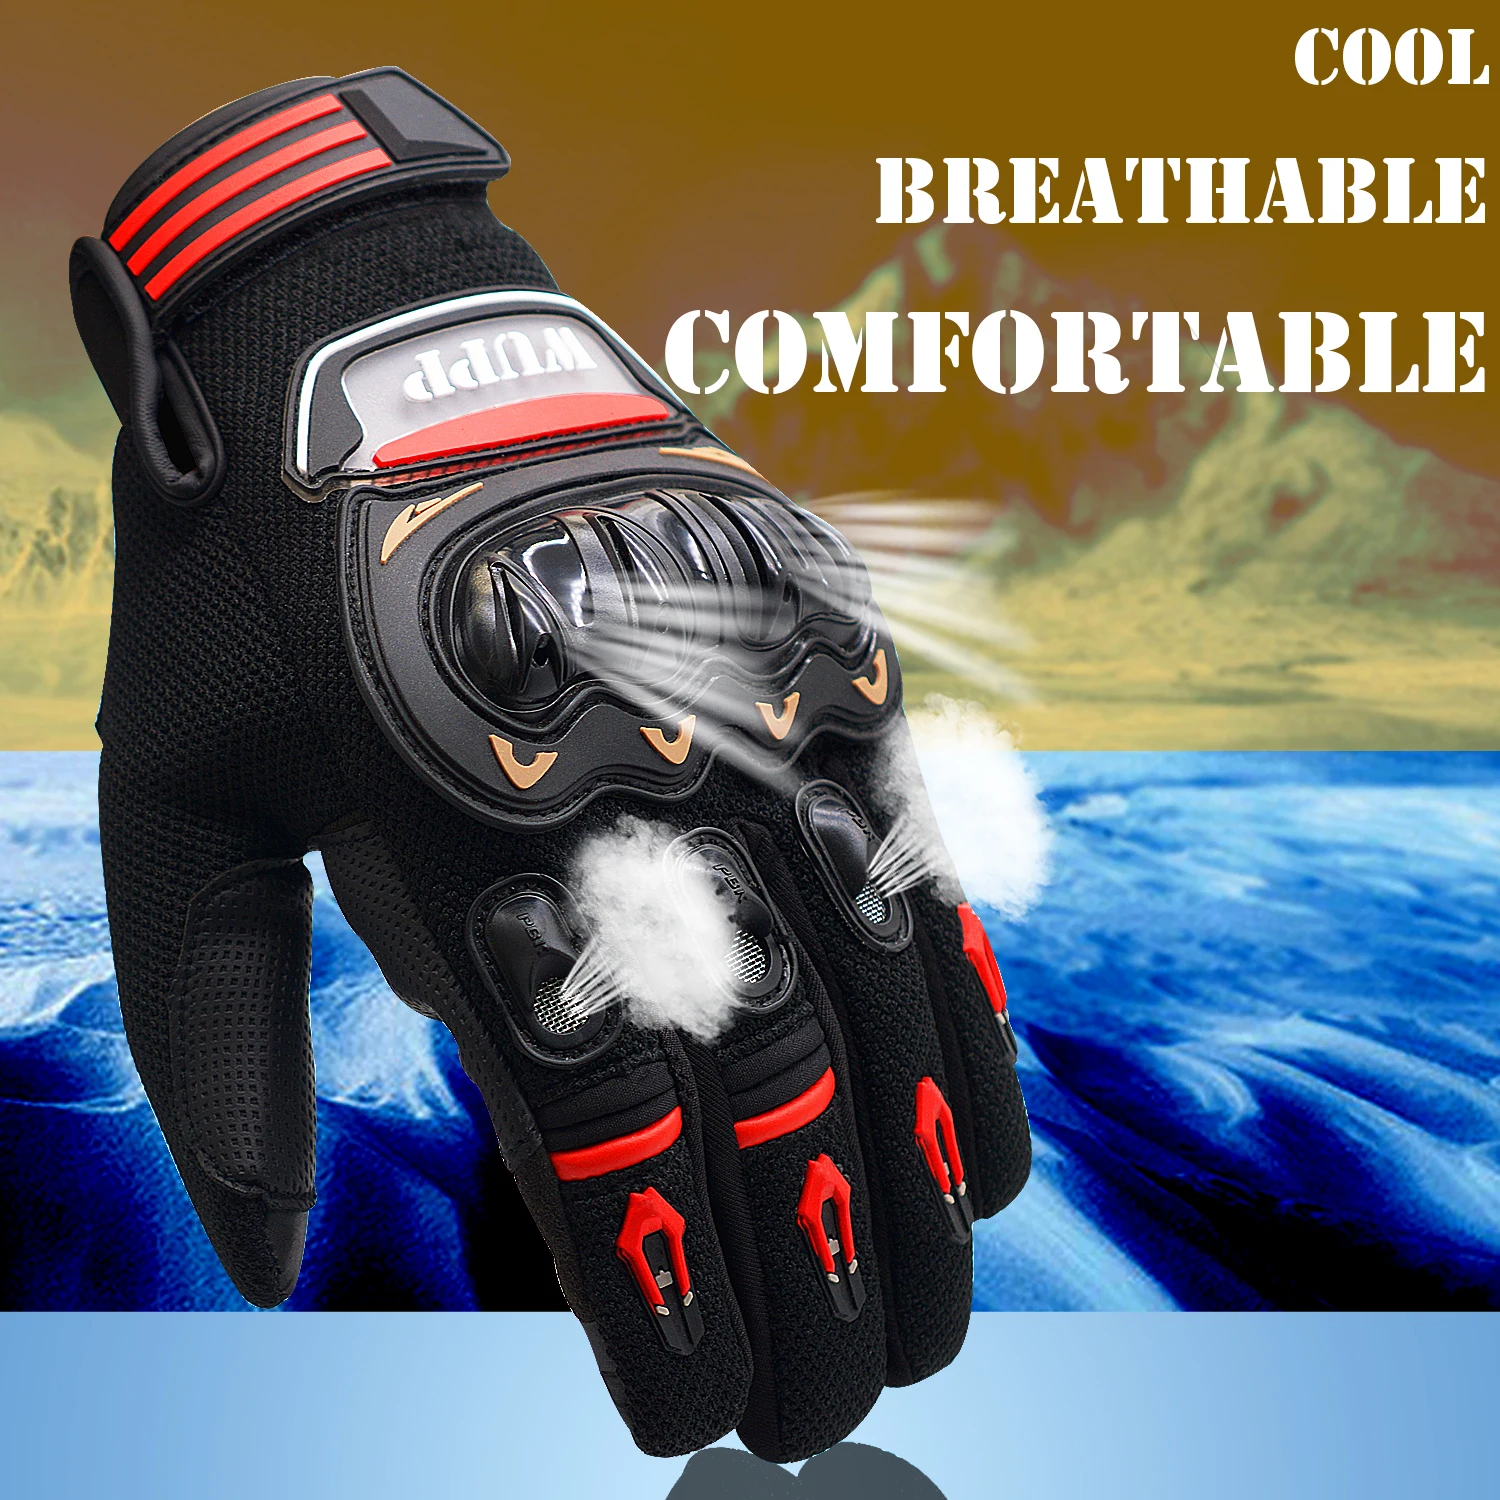 

Men's Carbon Fiber Shell Hard Knuckle Touchscreen Motocross Motorcycle Bicycle Motorbike Gloves Full Finger, As images